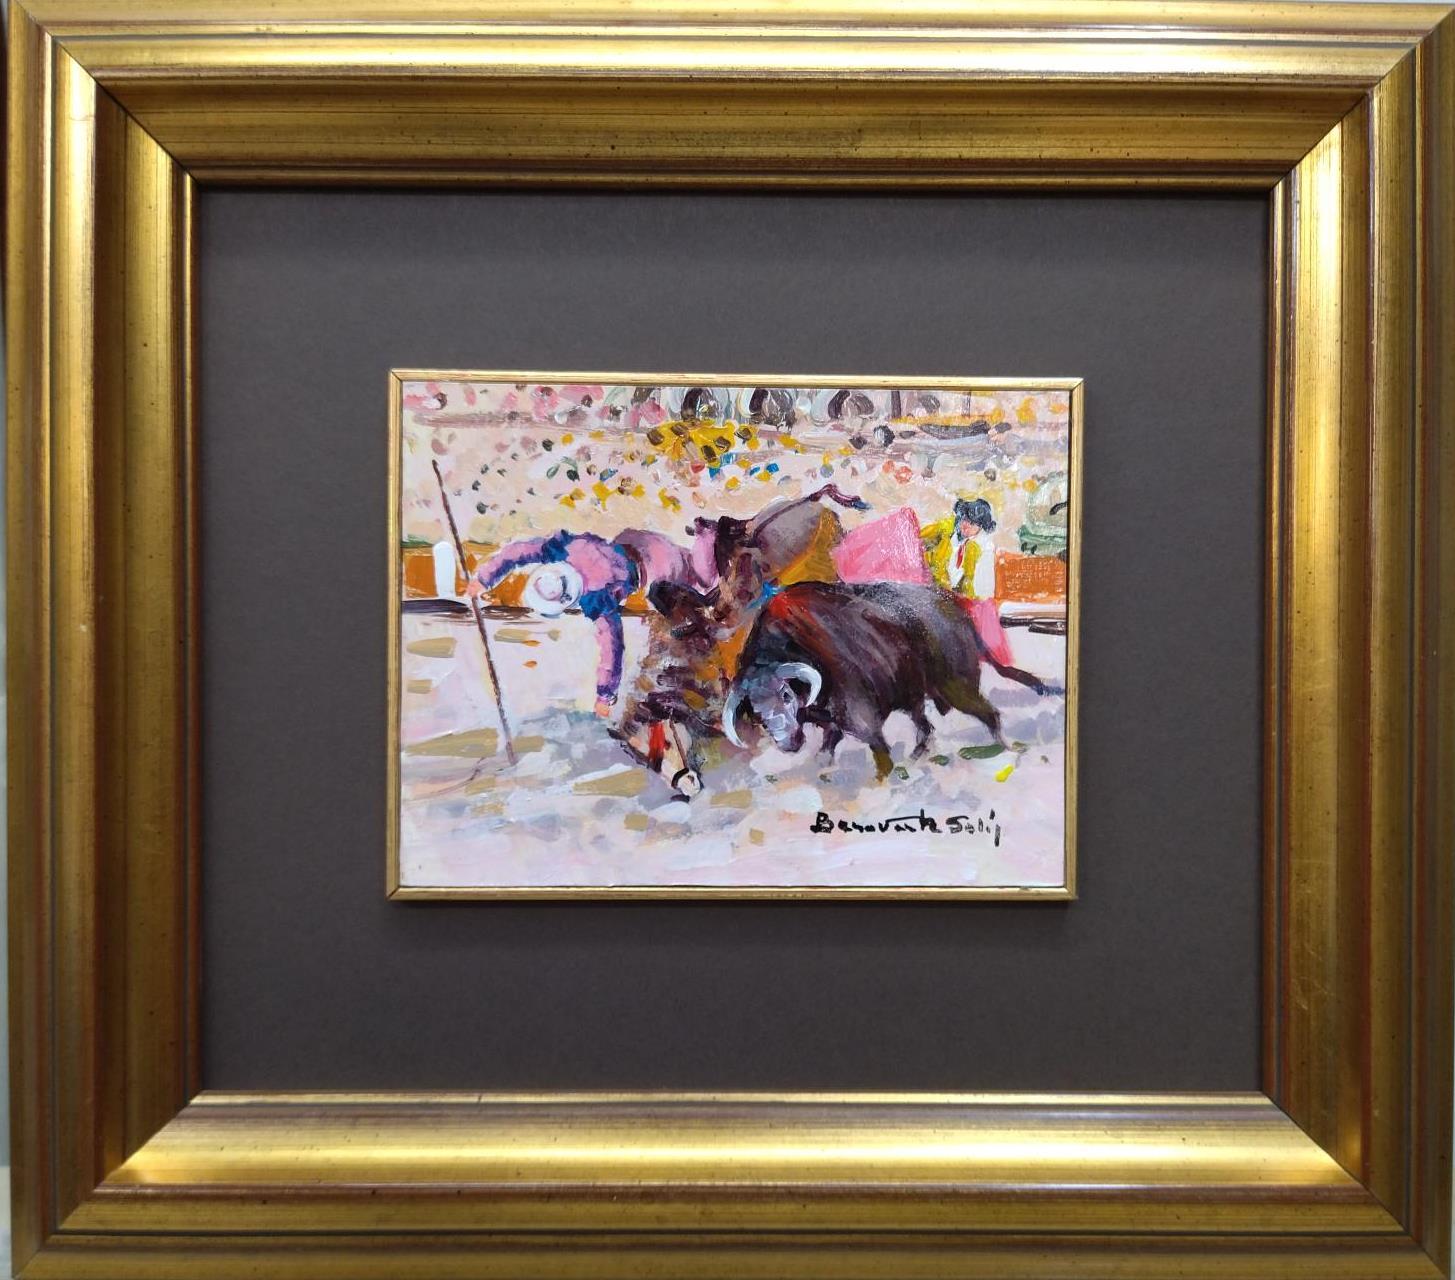   Benavente Solís  46.2 bullfight. picador. little original expressionist  - Expressionist Painting by Benavente Solis